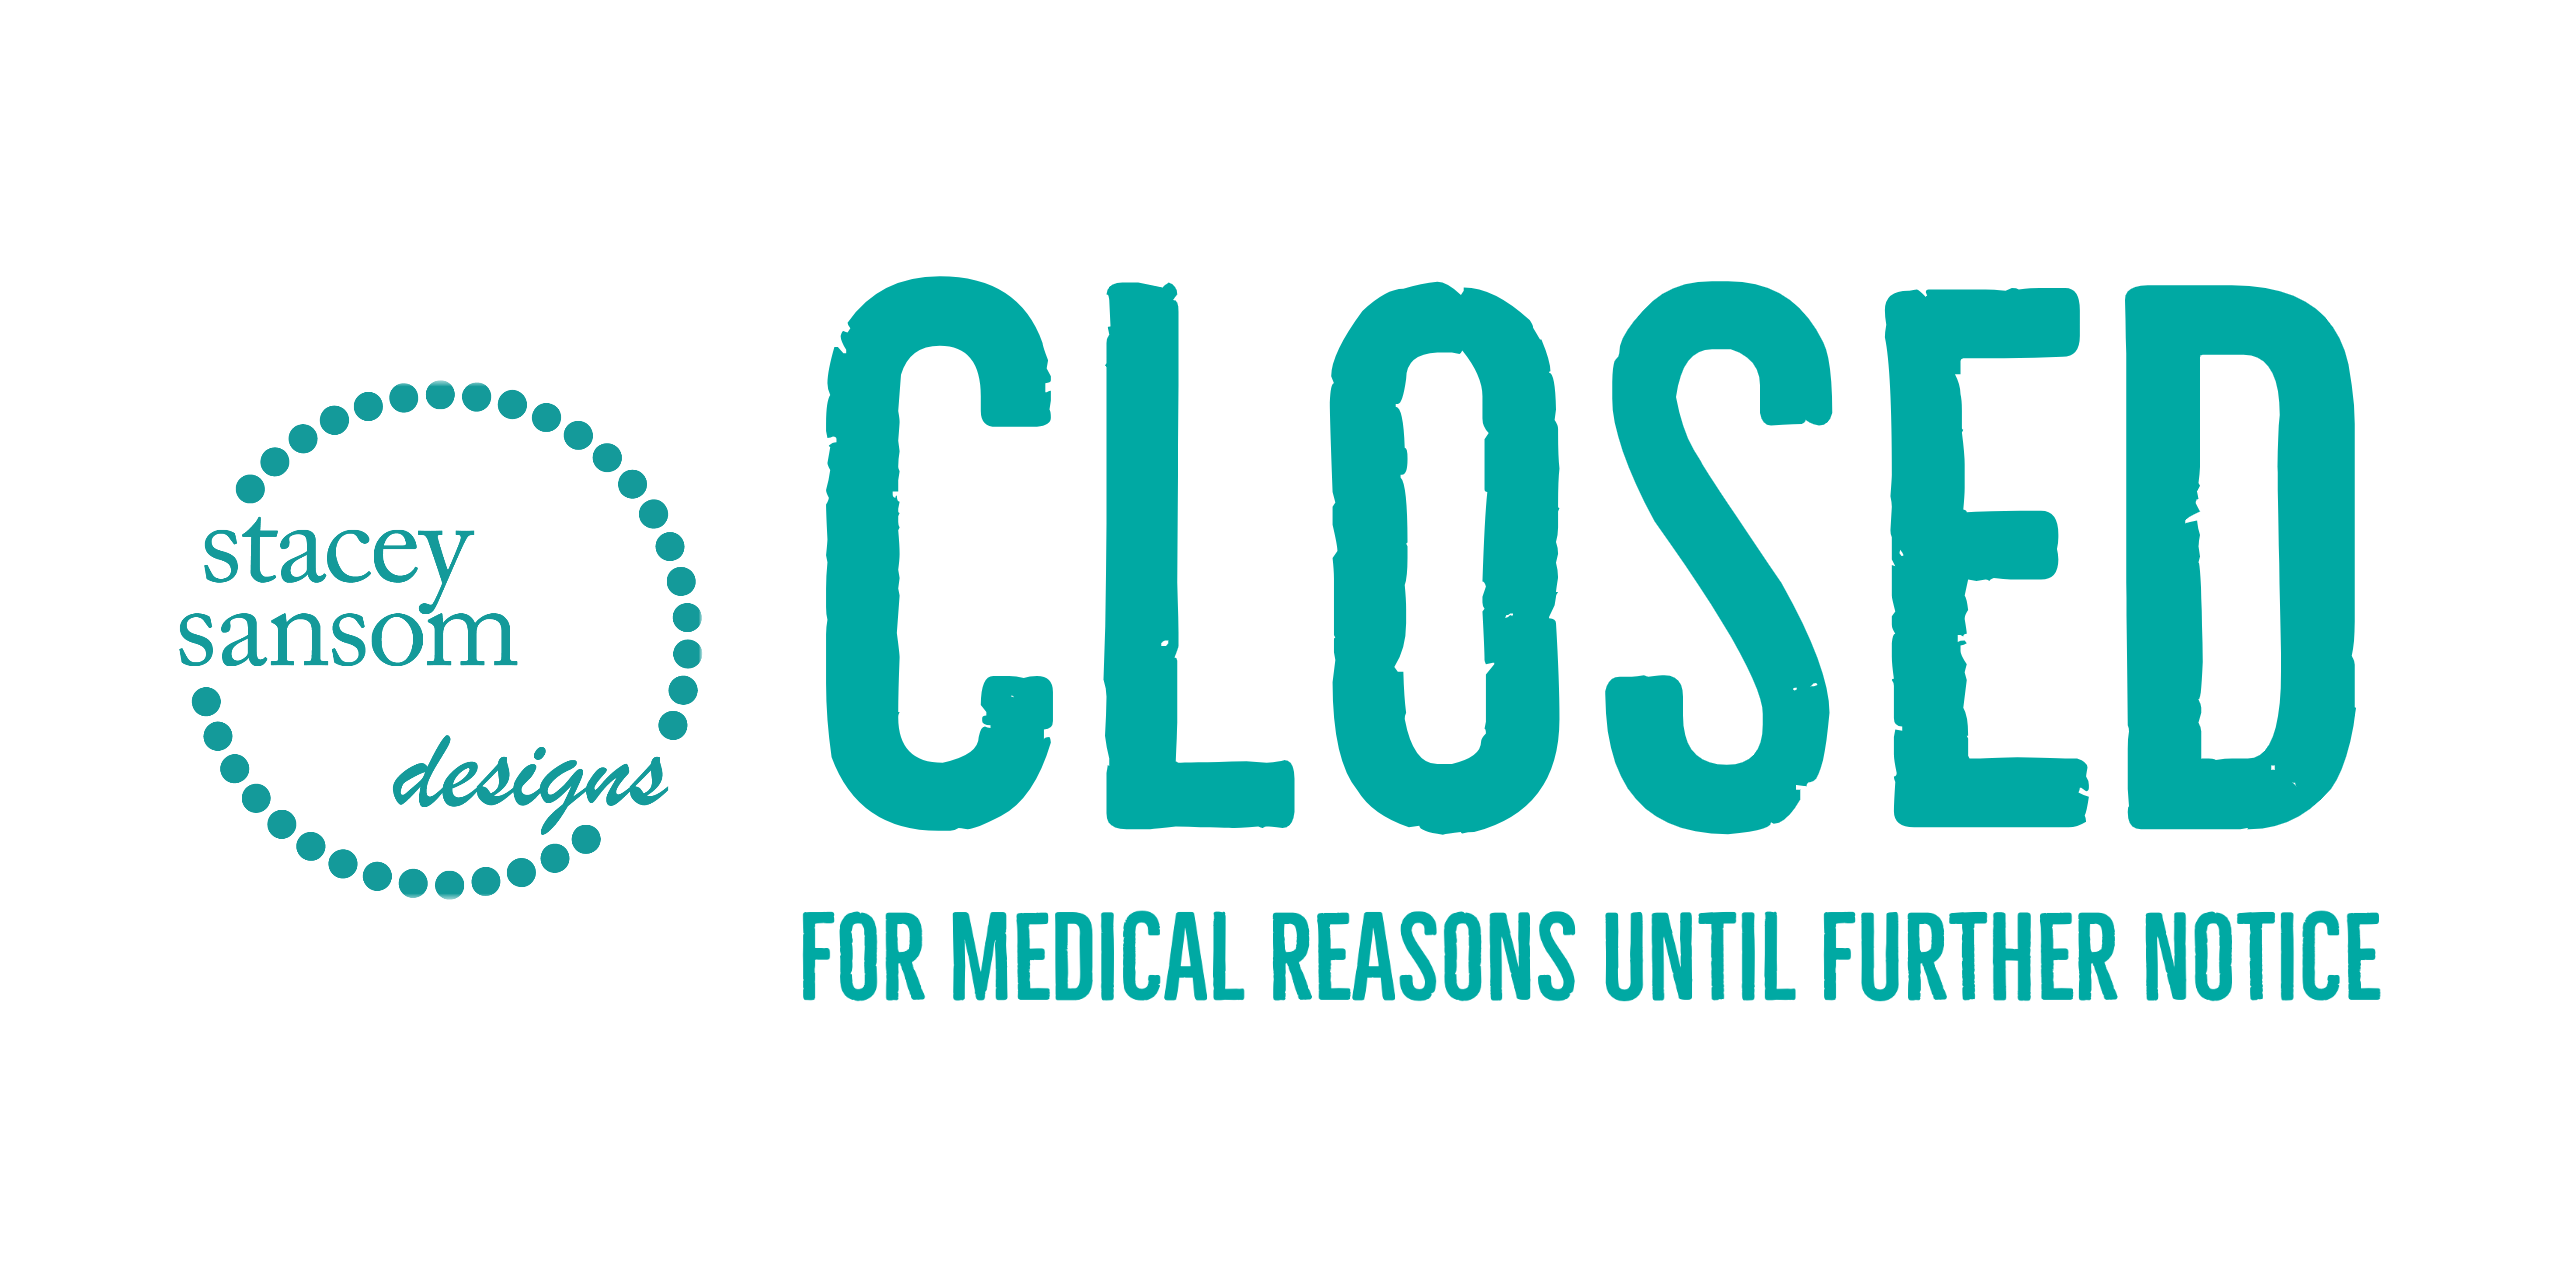 Temporarily Closed due to medical reasons until further notice | Stacey Sansom Designs